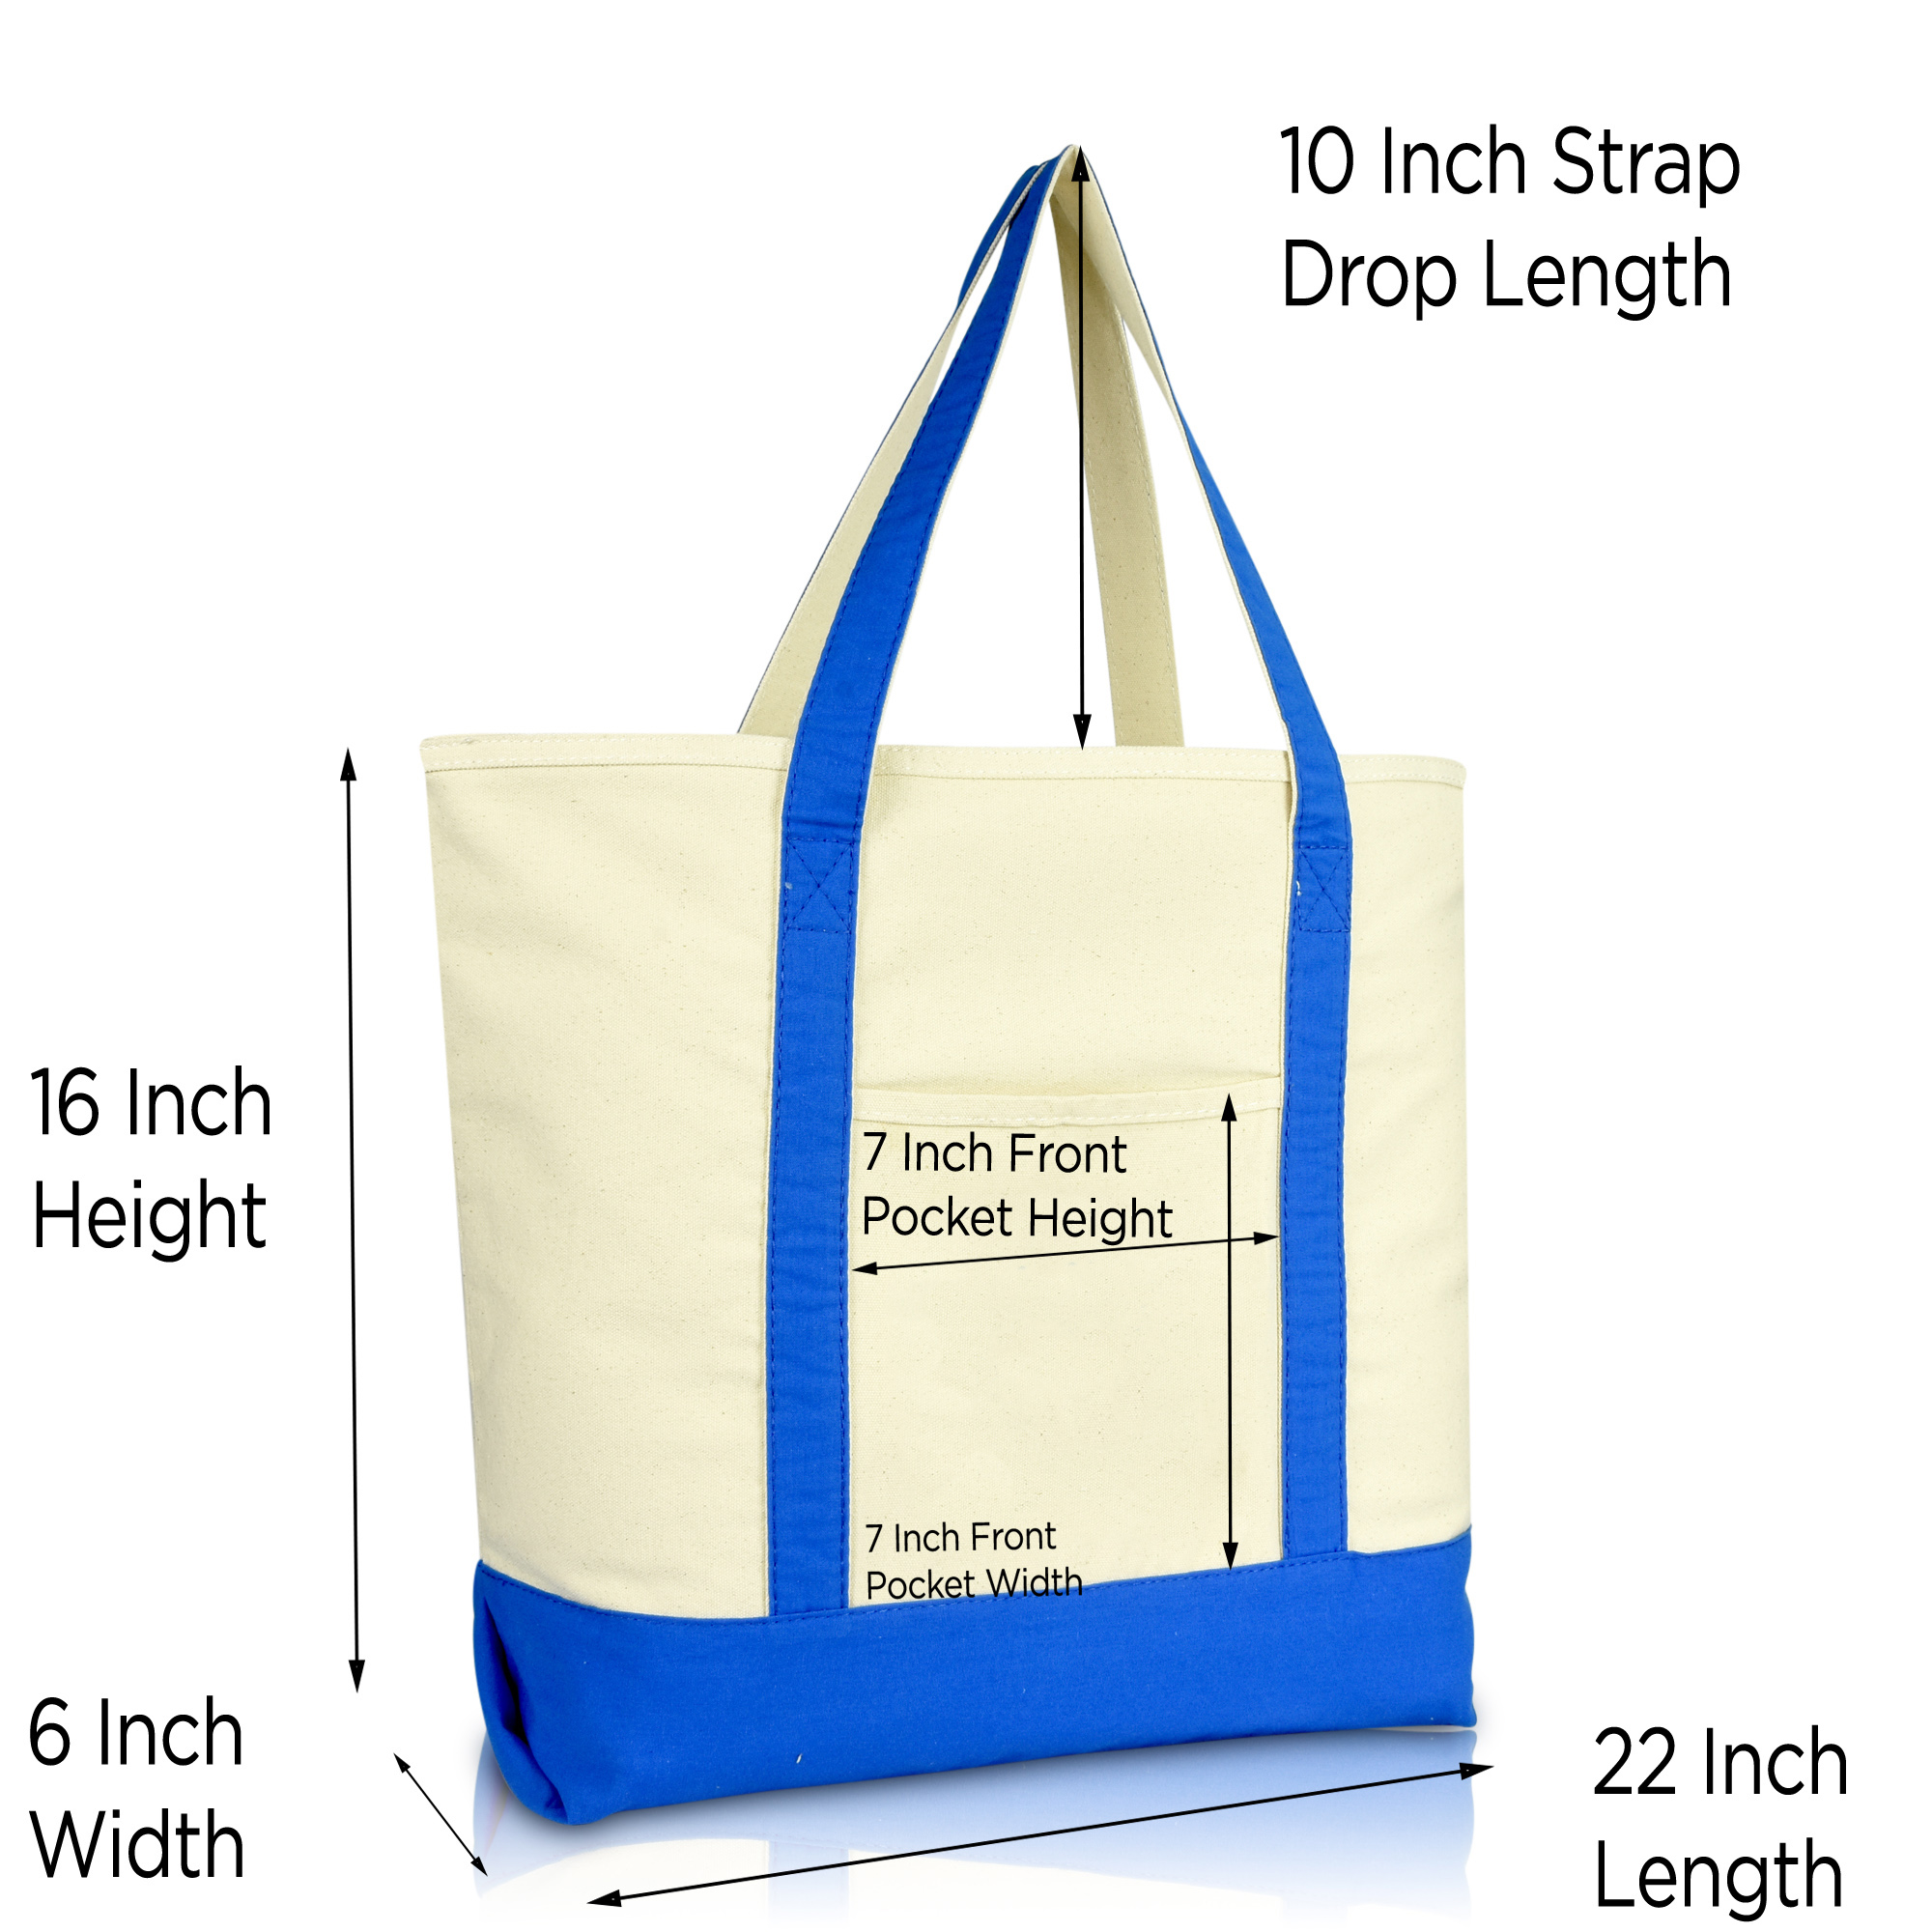 DALIX 22" Extra Large Cotton Canvas Zippered Shopping Tote Grocery Bag in Royal Blue - image 2 of 6